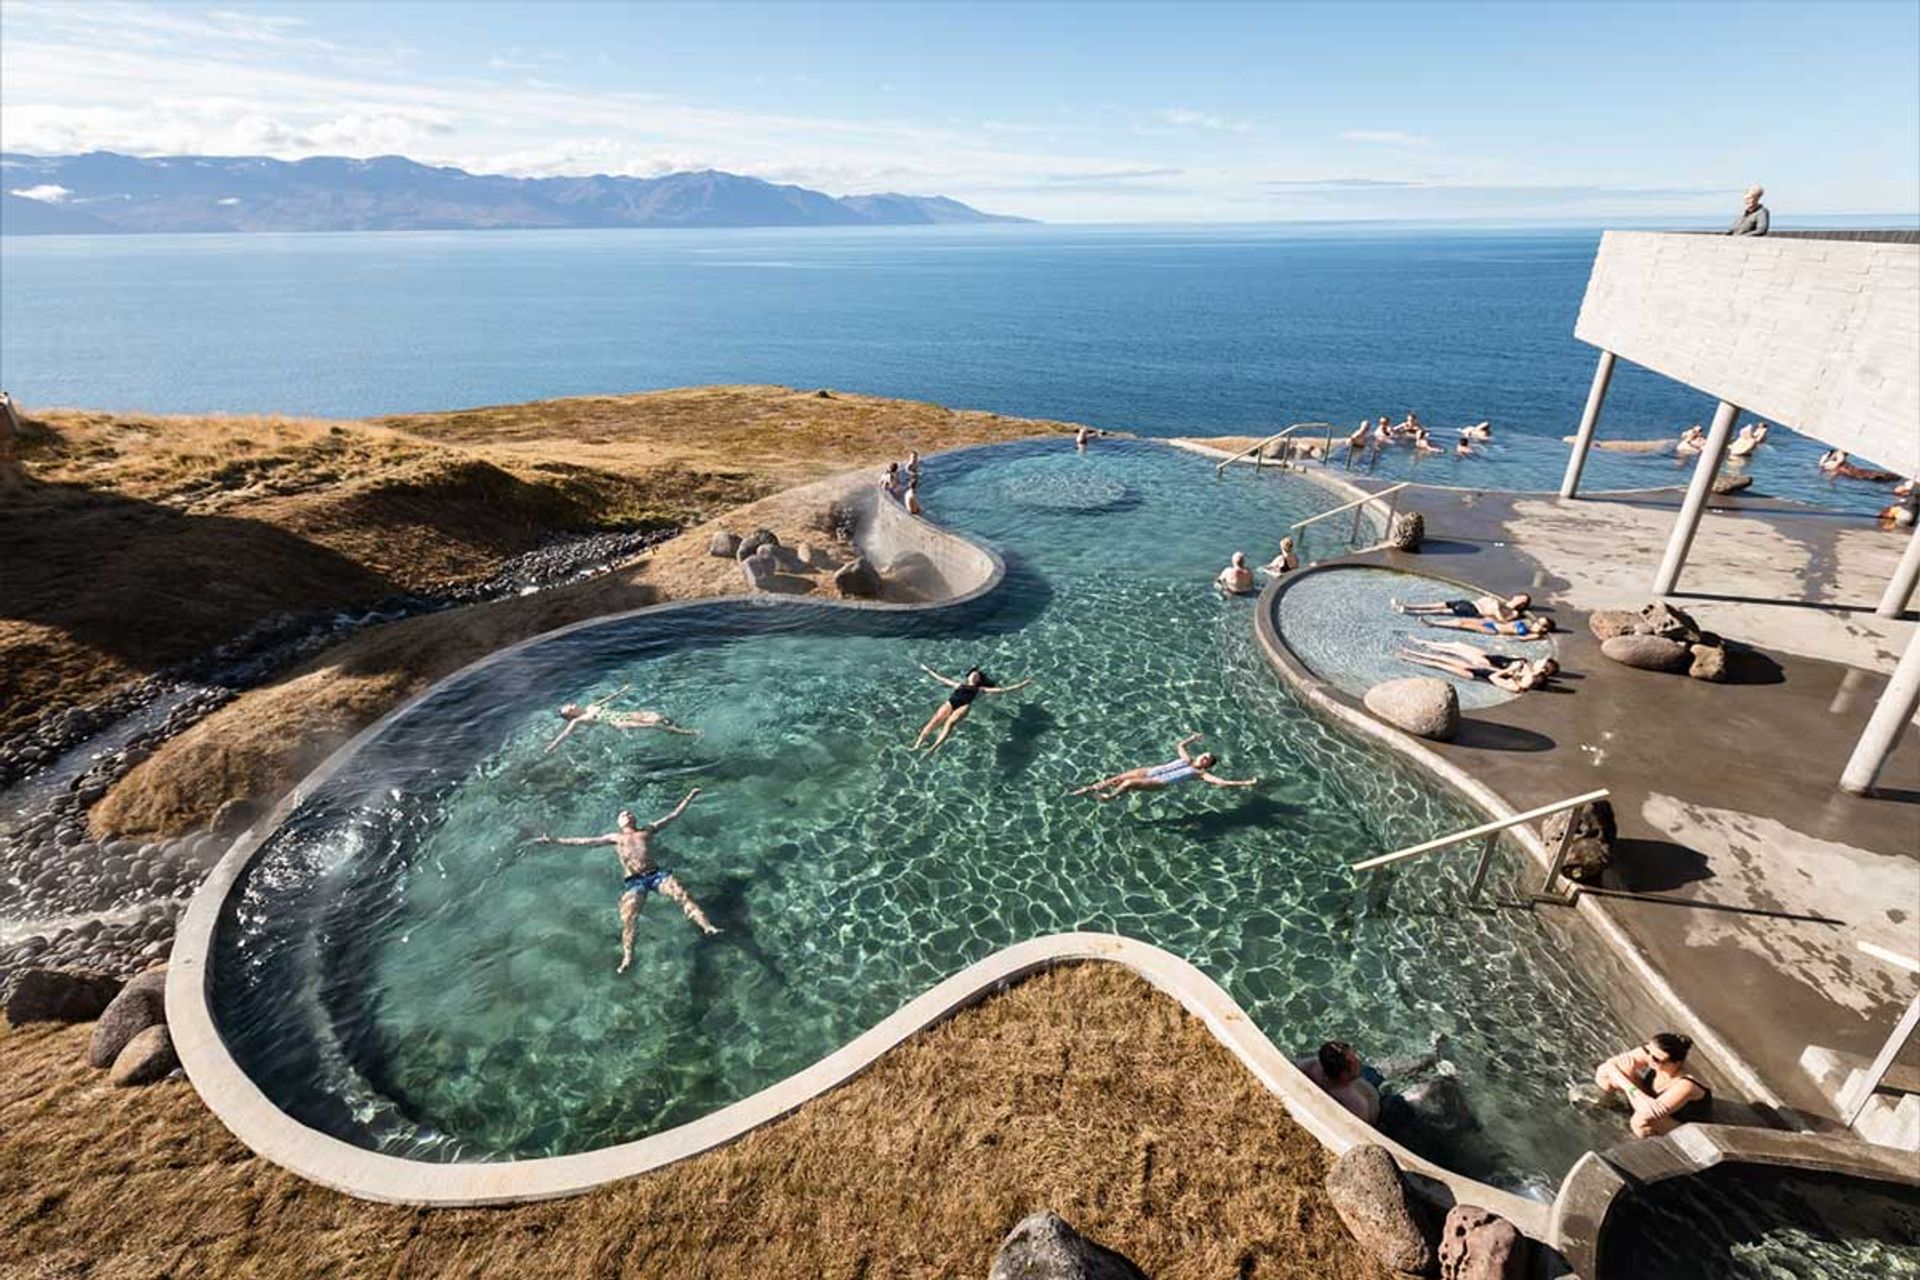 Indulge in the ultimate relaxation at GeoSea hot spring in North Iceland. With stunning views of the ocean and the surrounding mountains, this geothermal spa offers a unique and rejuvenating experience. Take a dip in the warm waters and let your worries melt away.